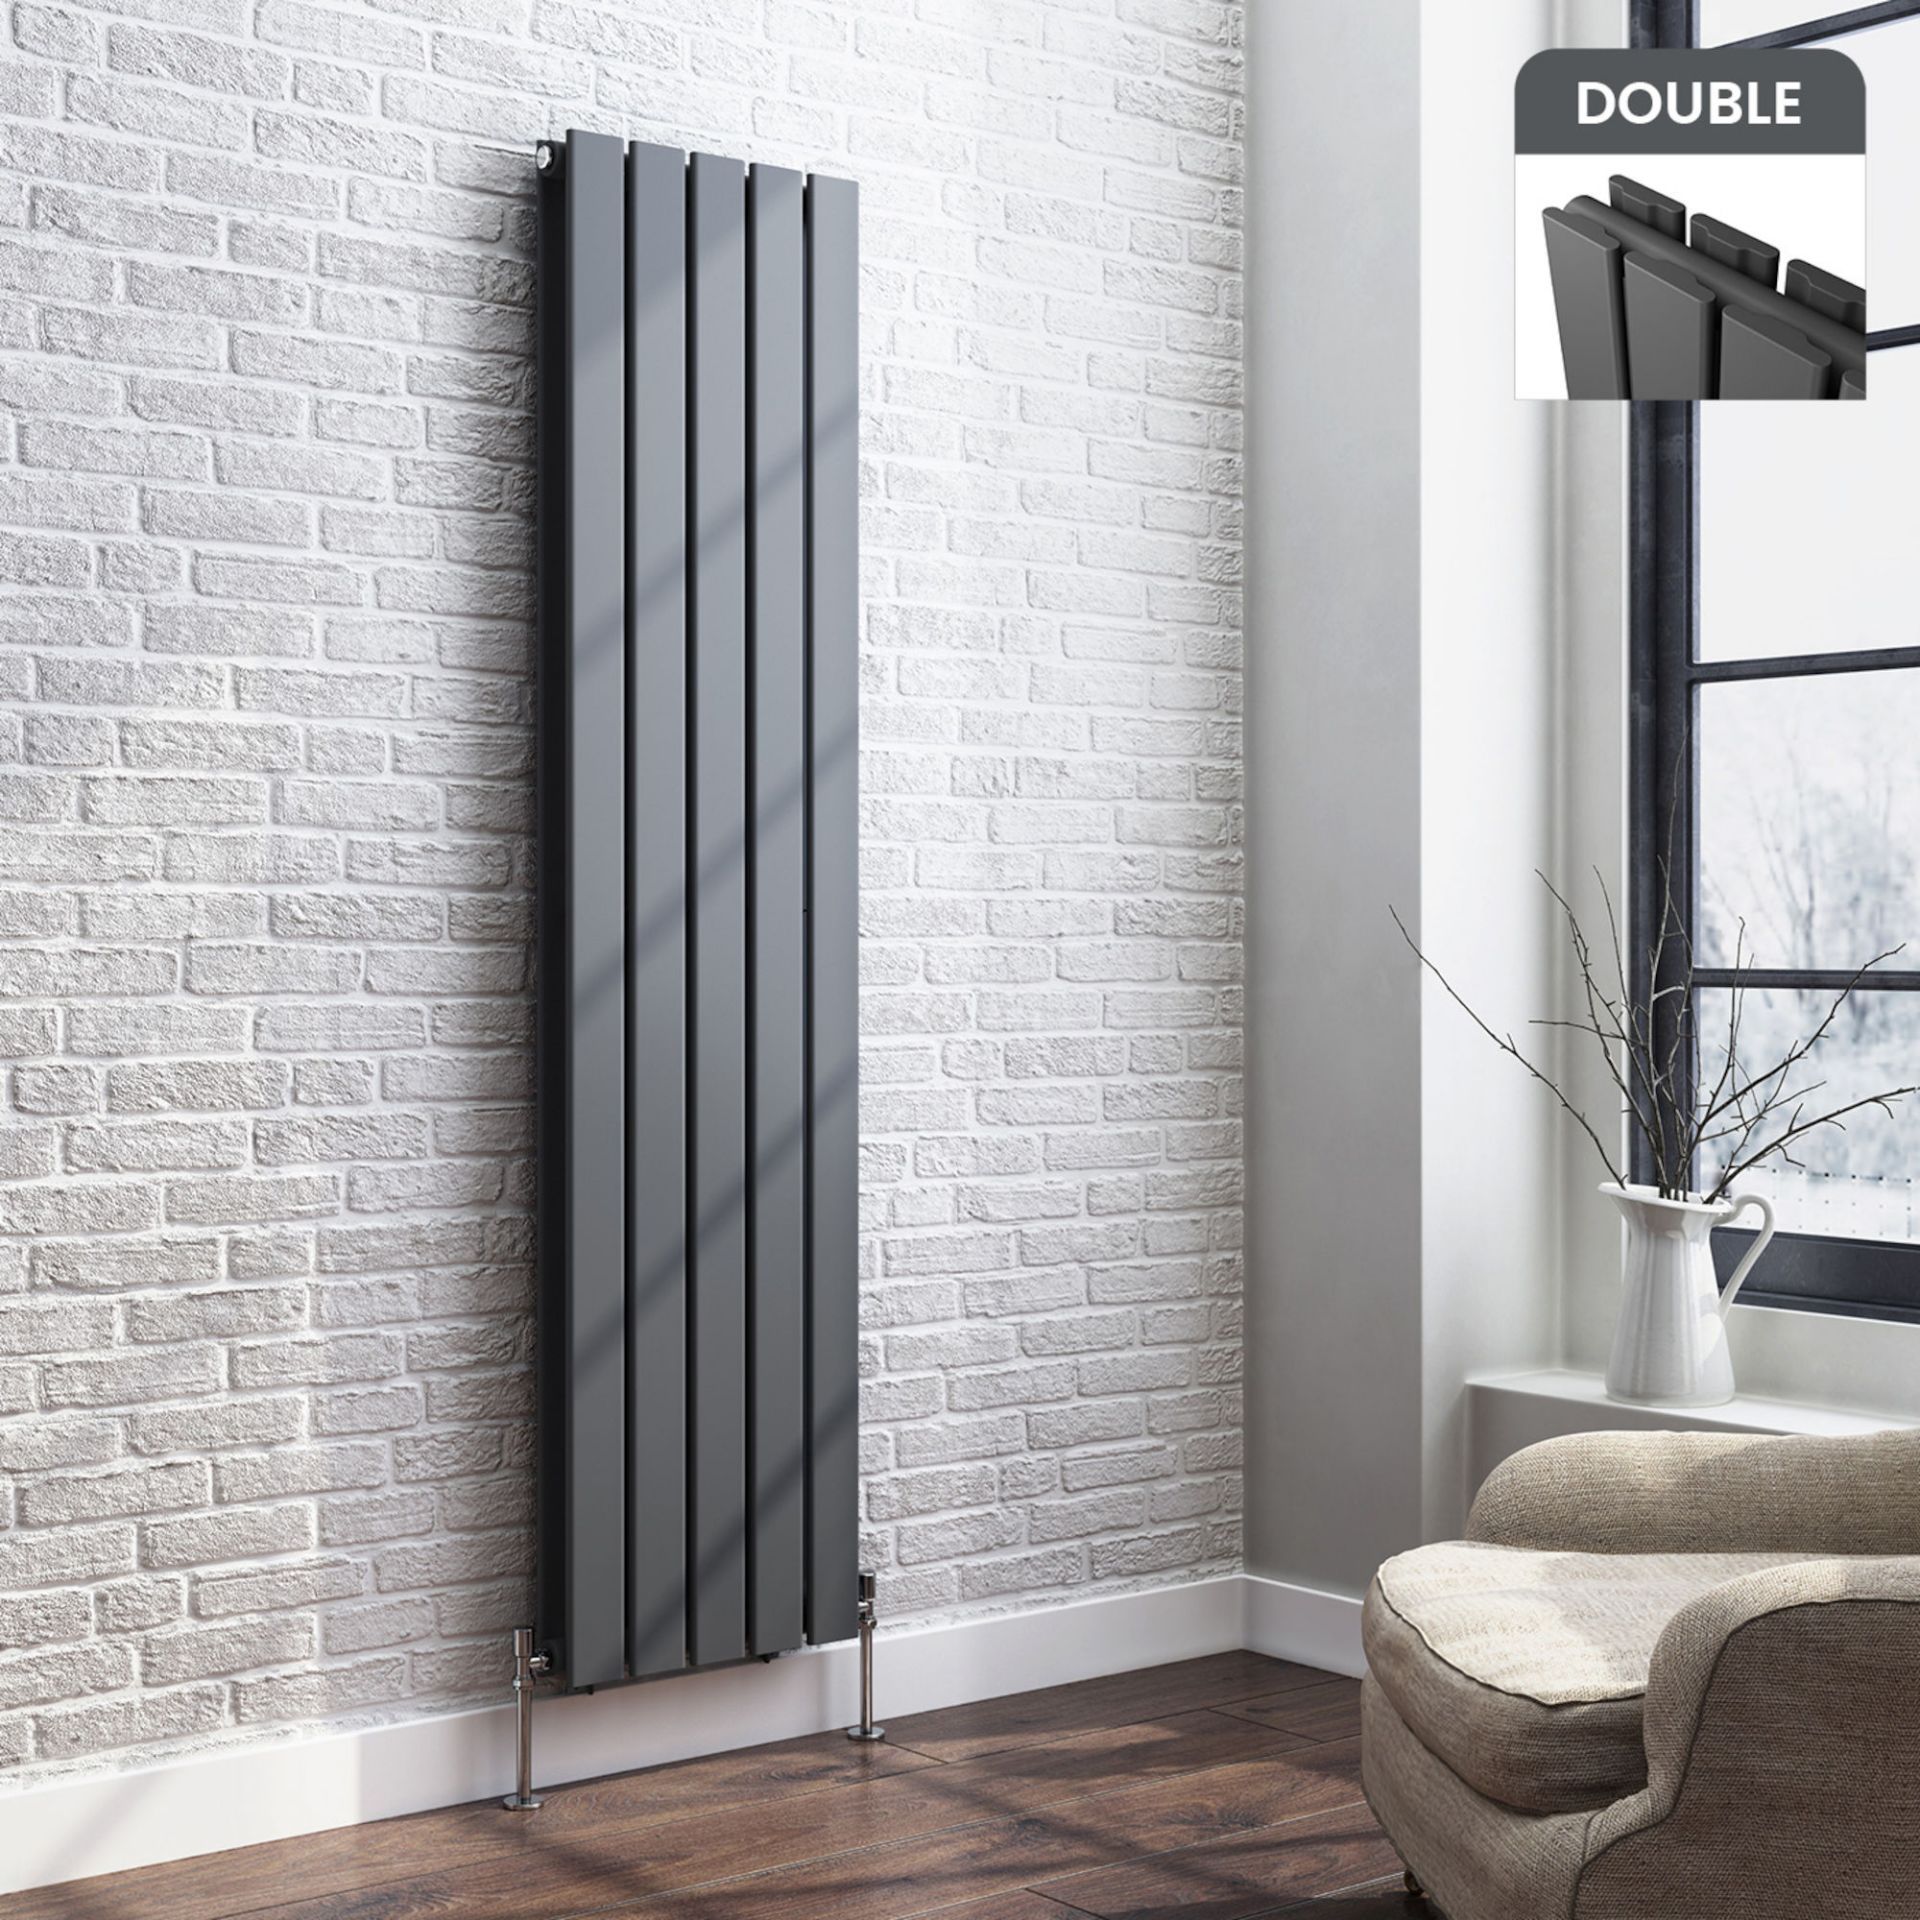 1600x360mm Anthracite Double Flat Panel Vertical Radiator. RRP £431.99. Made with low carbon